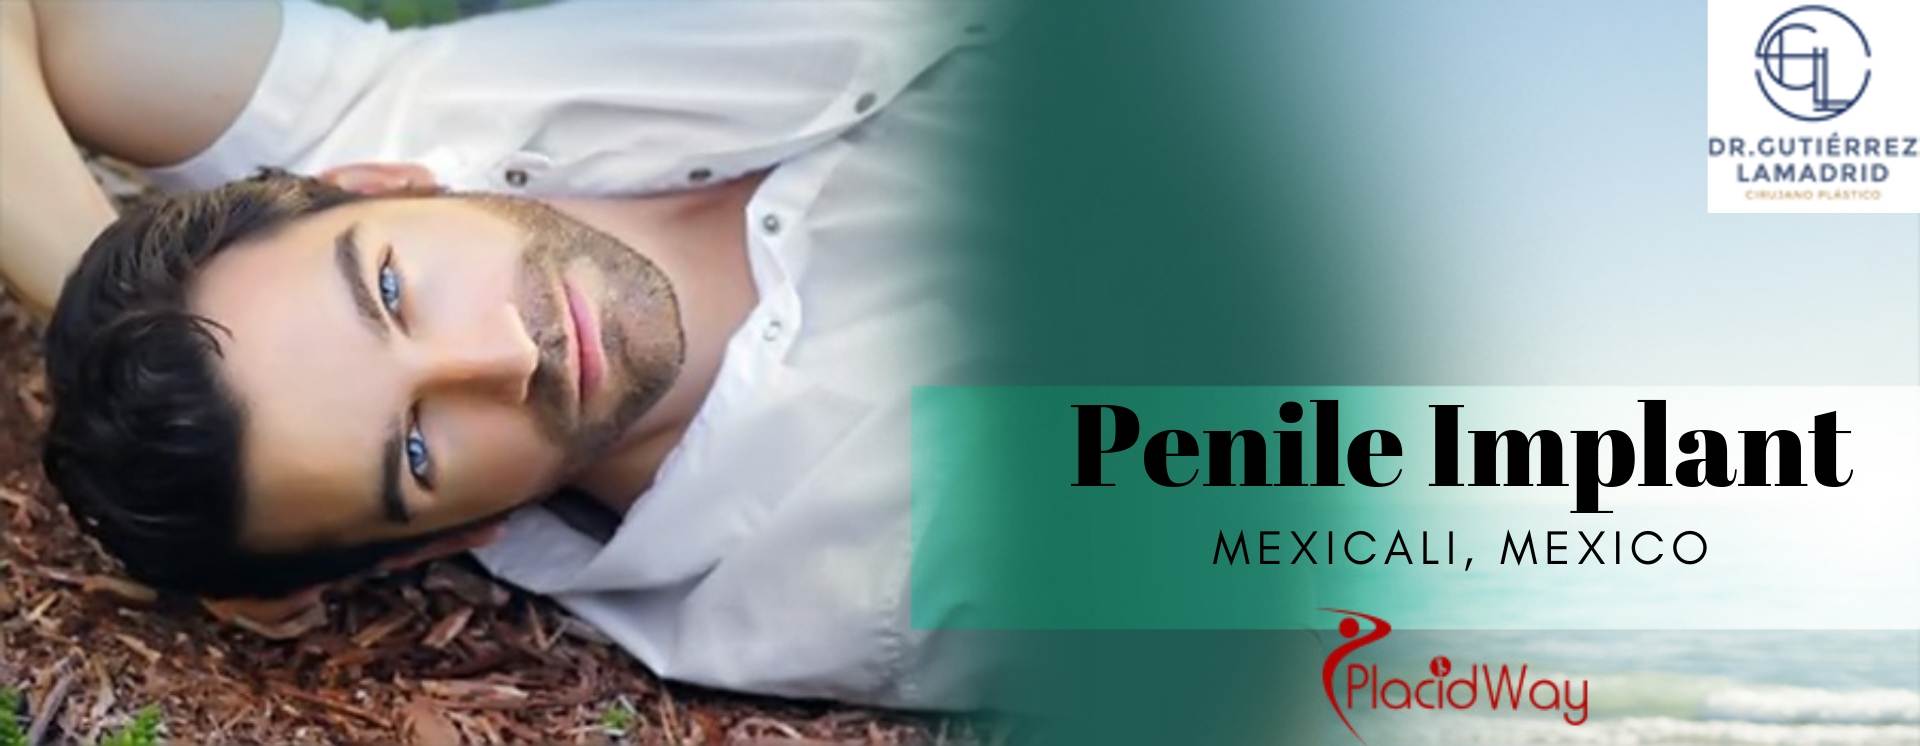 Penile Implant in Mexicali, mexico